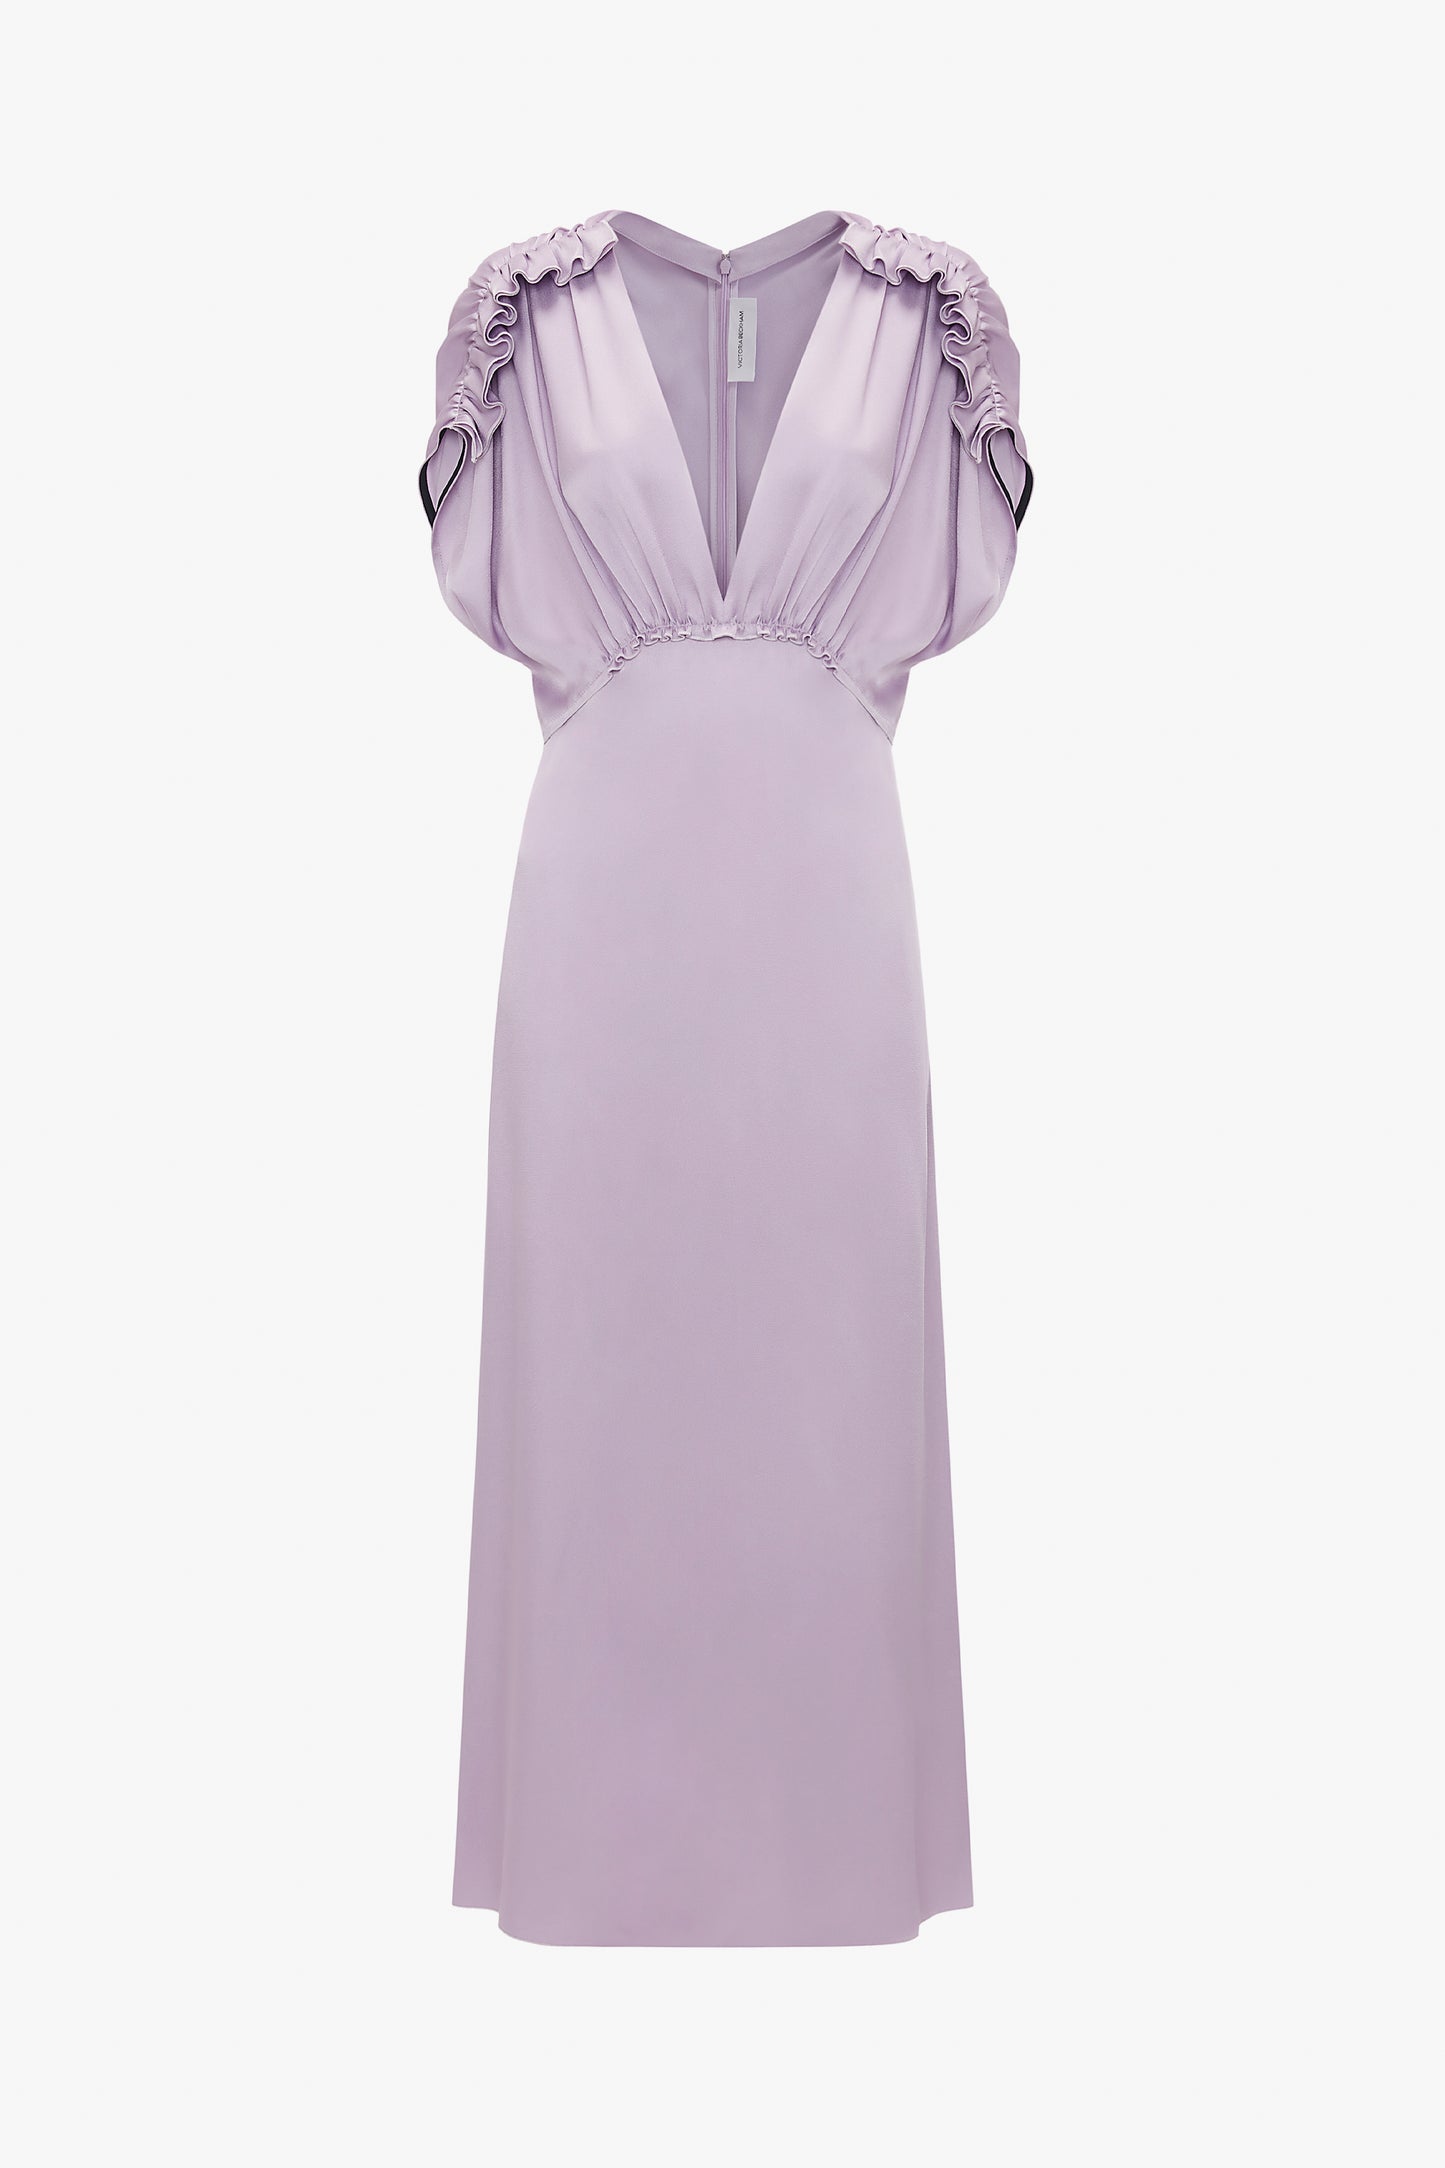 A stunning V-Neck Ruffle Midi Dress In Petunia by Victoria Beckham, featuring gathered shoulder details and a mid-length hem, reminiscent of Victoria Beckham's elegant dress designs, displayed on a white background.